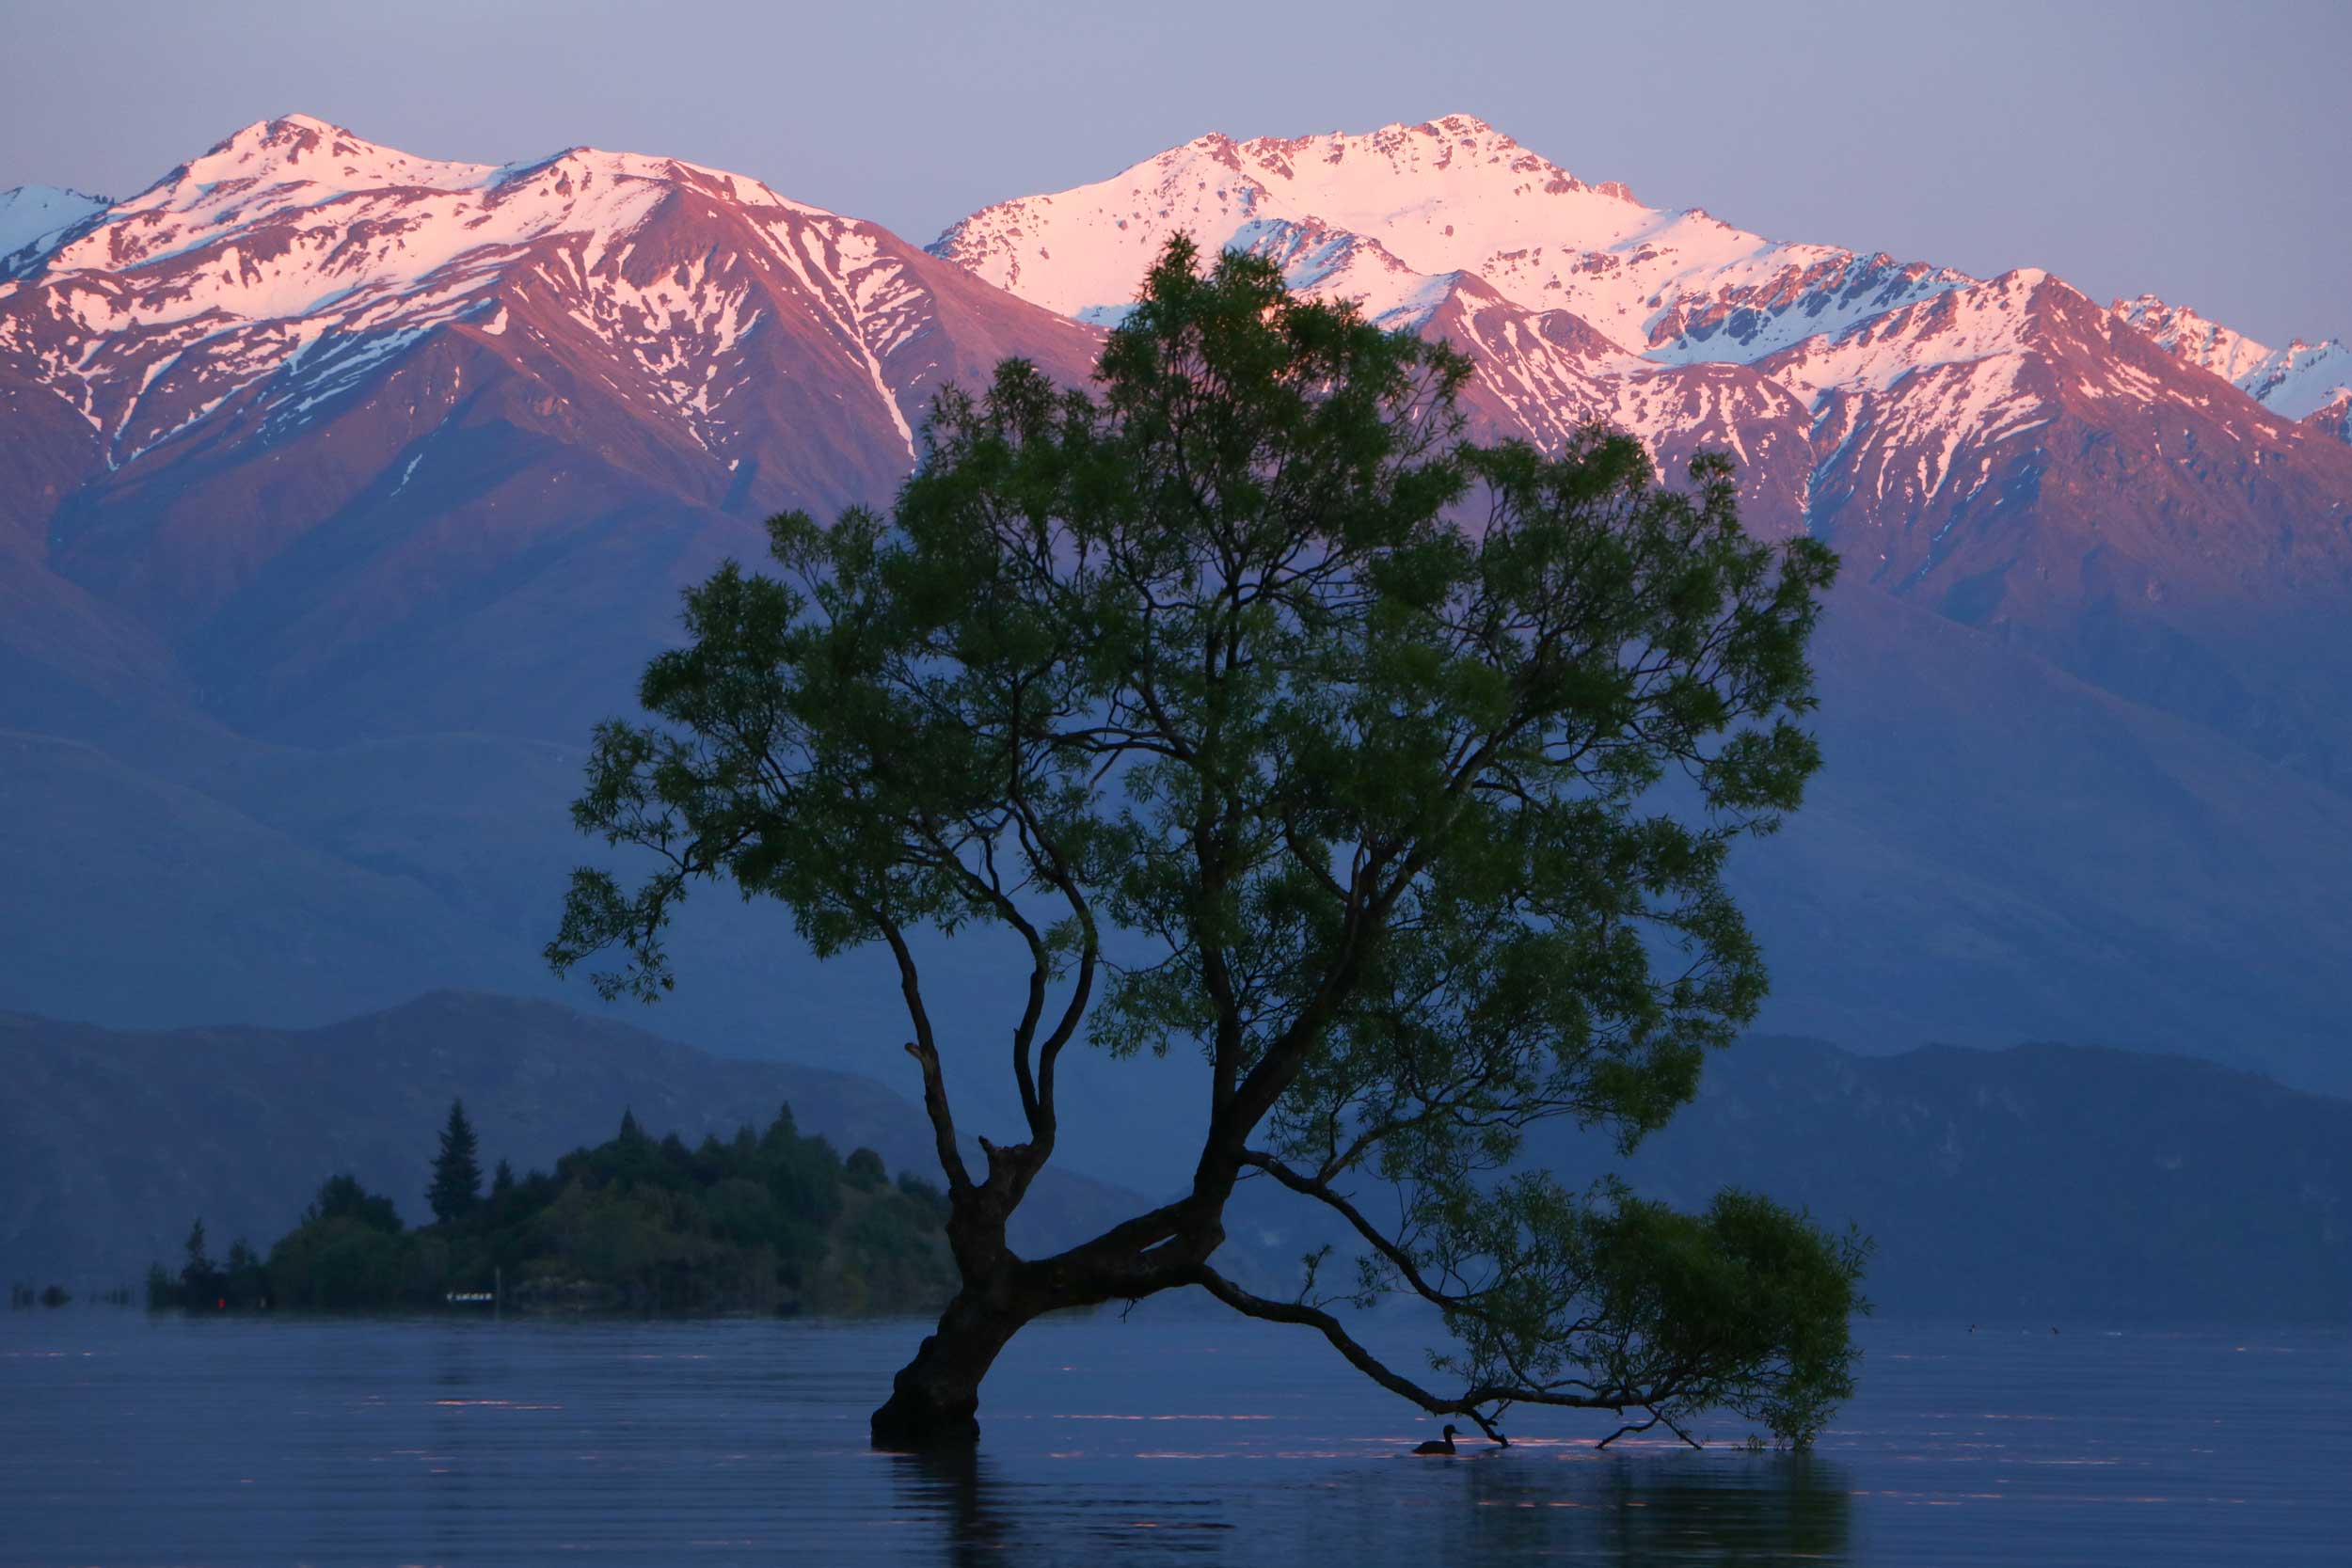 A tree leaning over in a lake with a duck under it with pink tipped mountains in the background at sunset, Wanaka, New Zealand